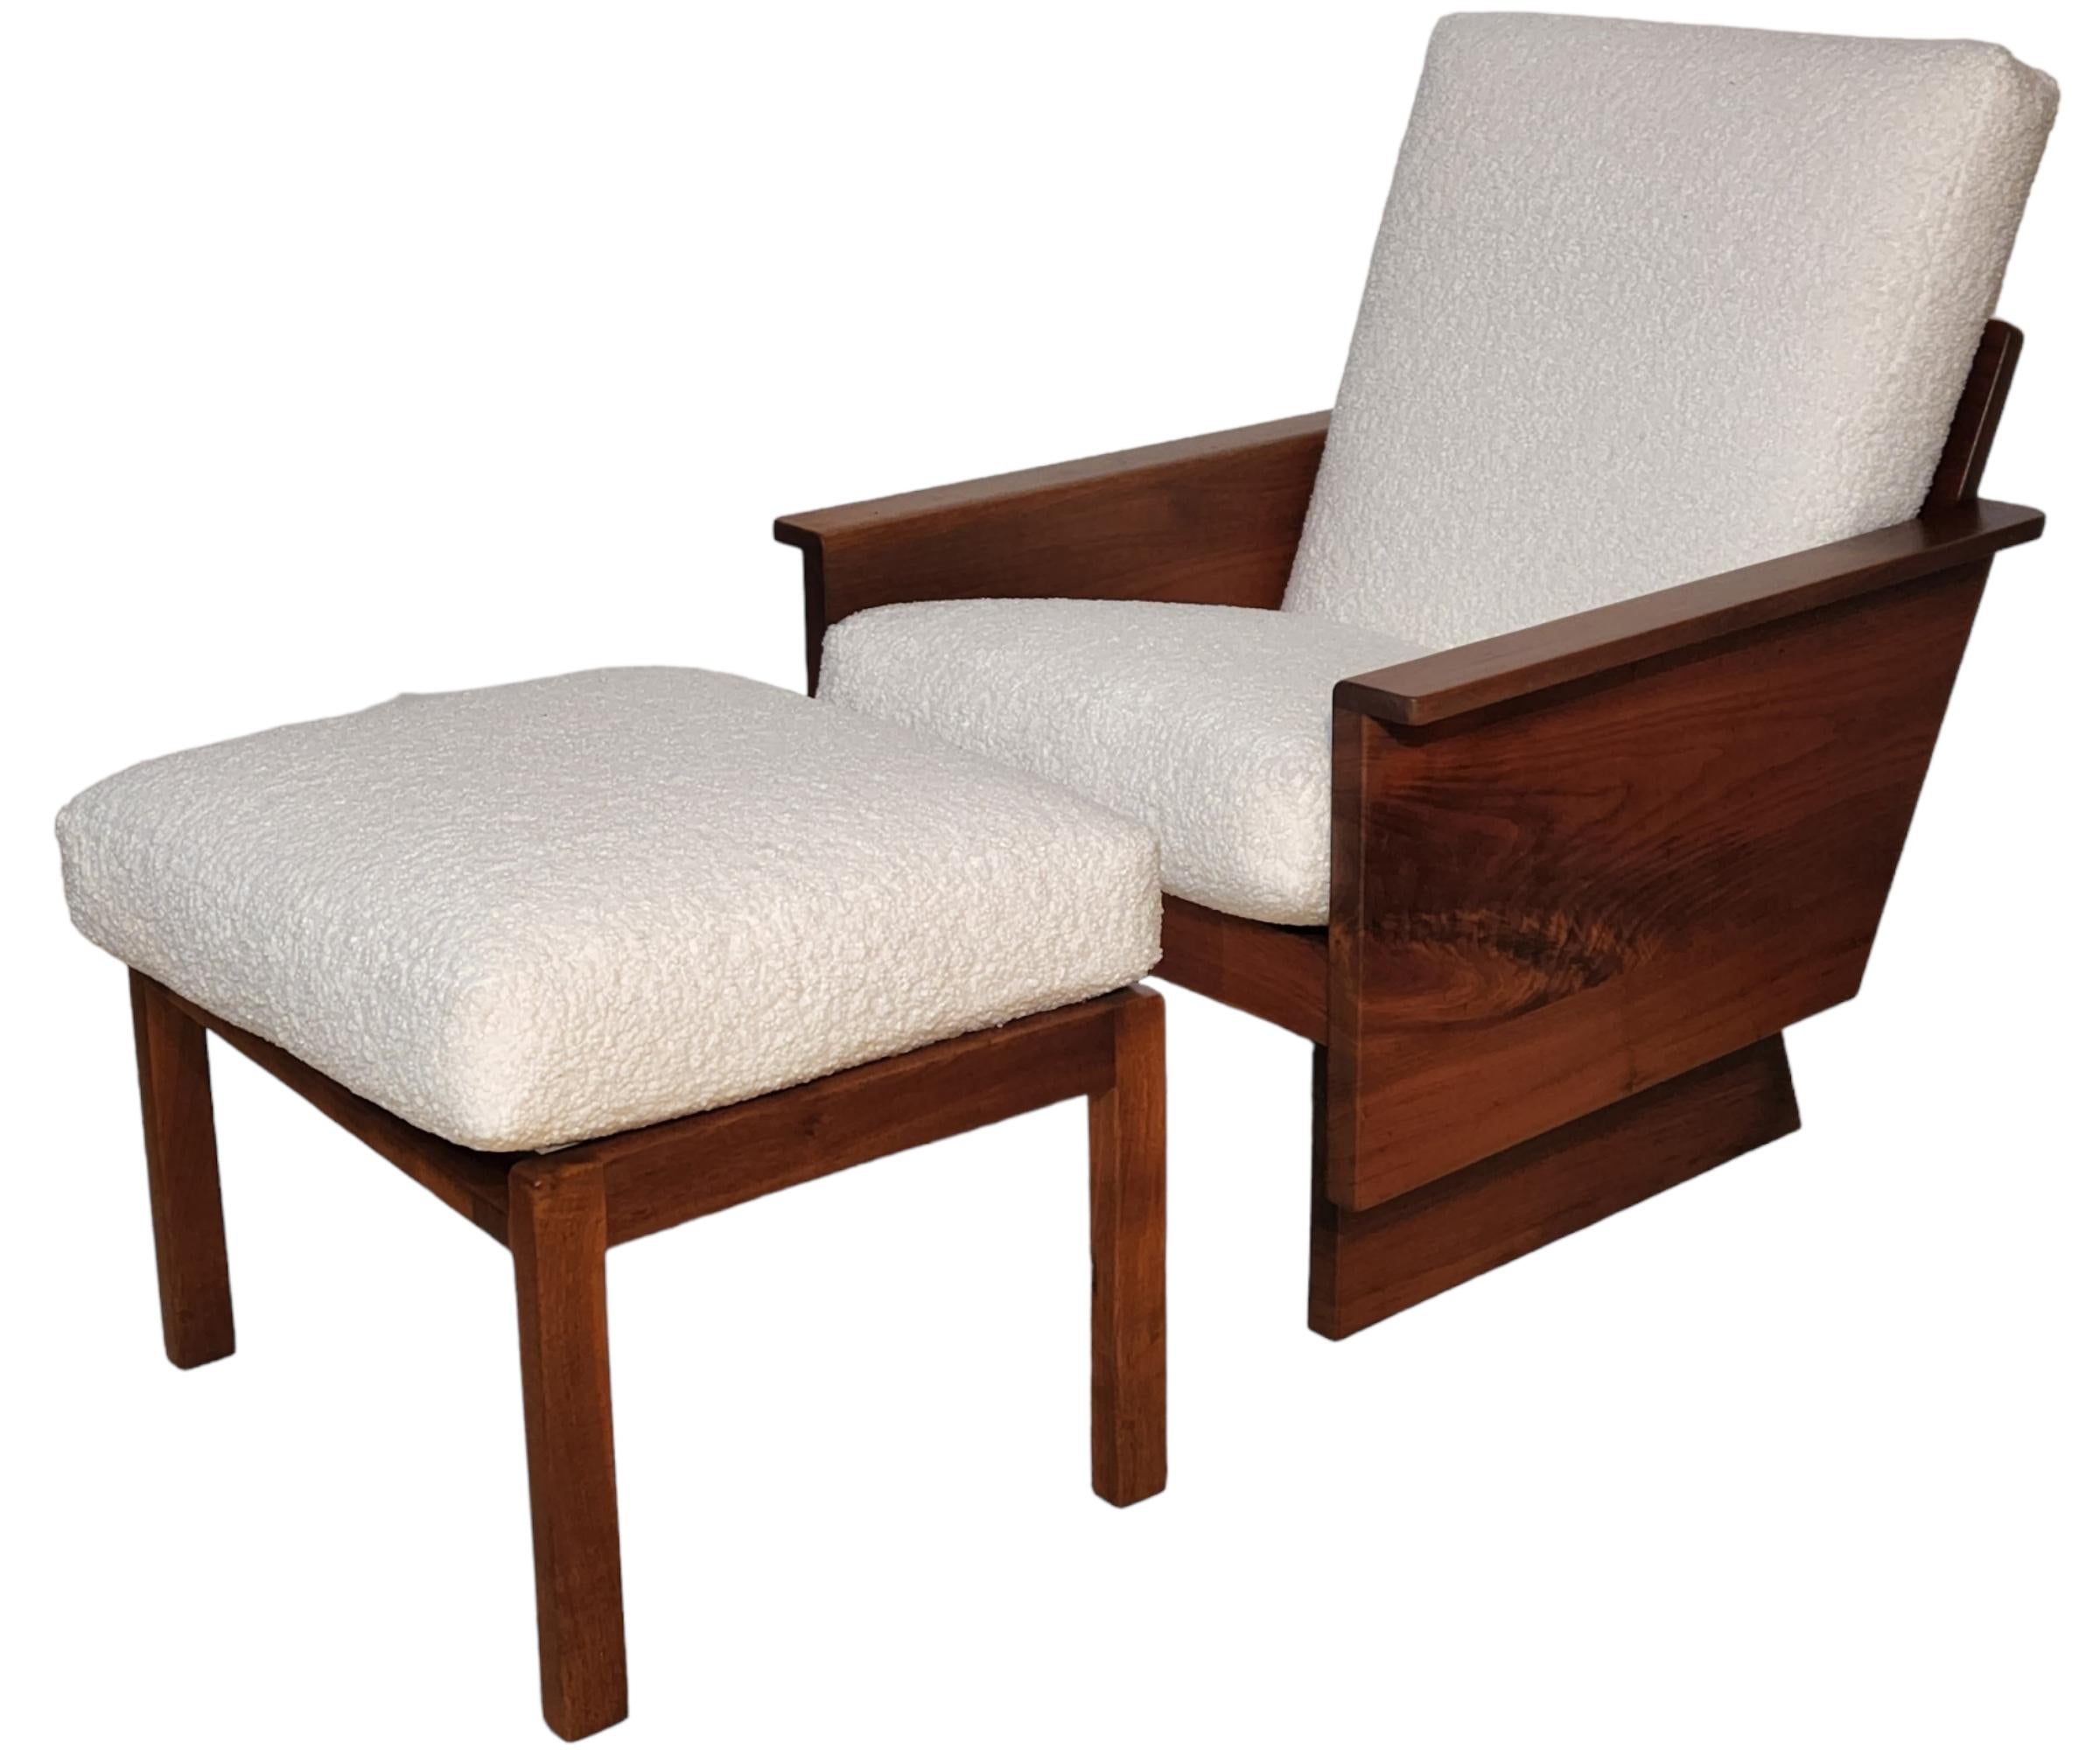 American Craftsman Arden Riddle Lounge Chair and Ottoman Studio Craft, 1979